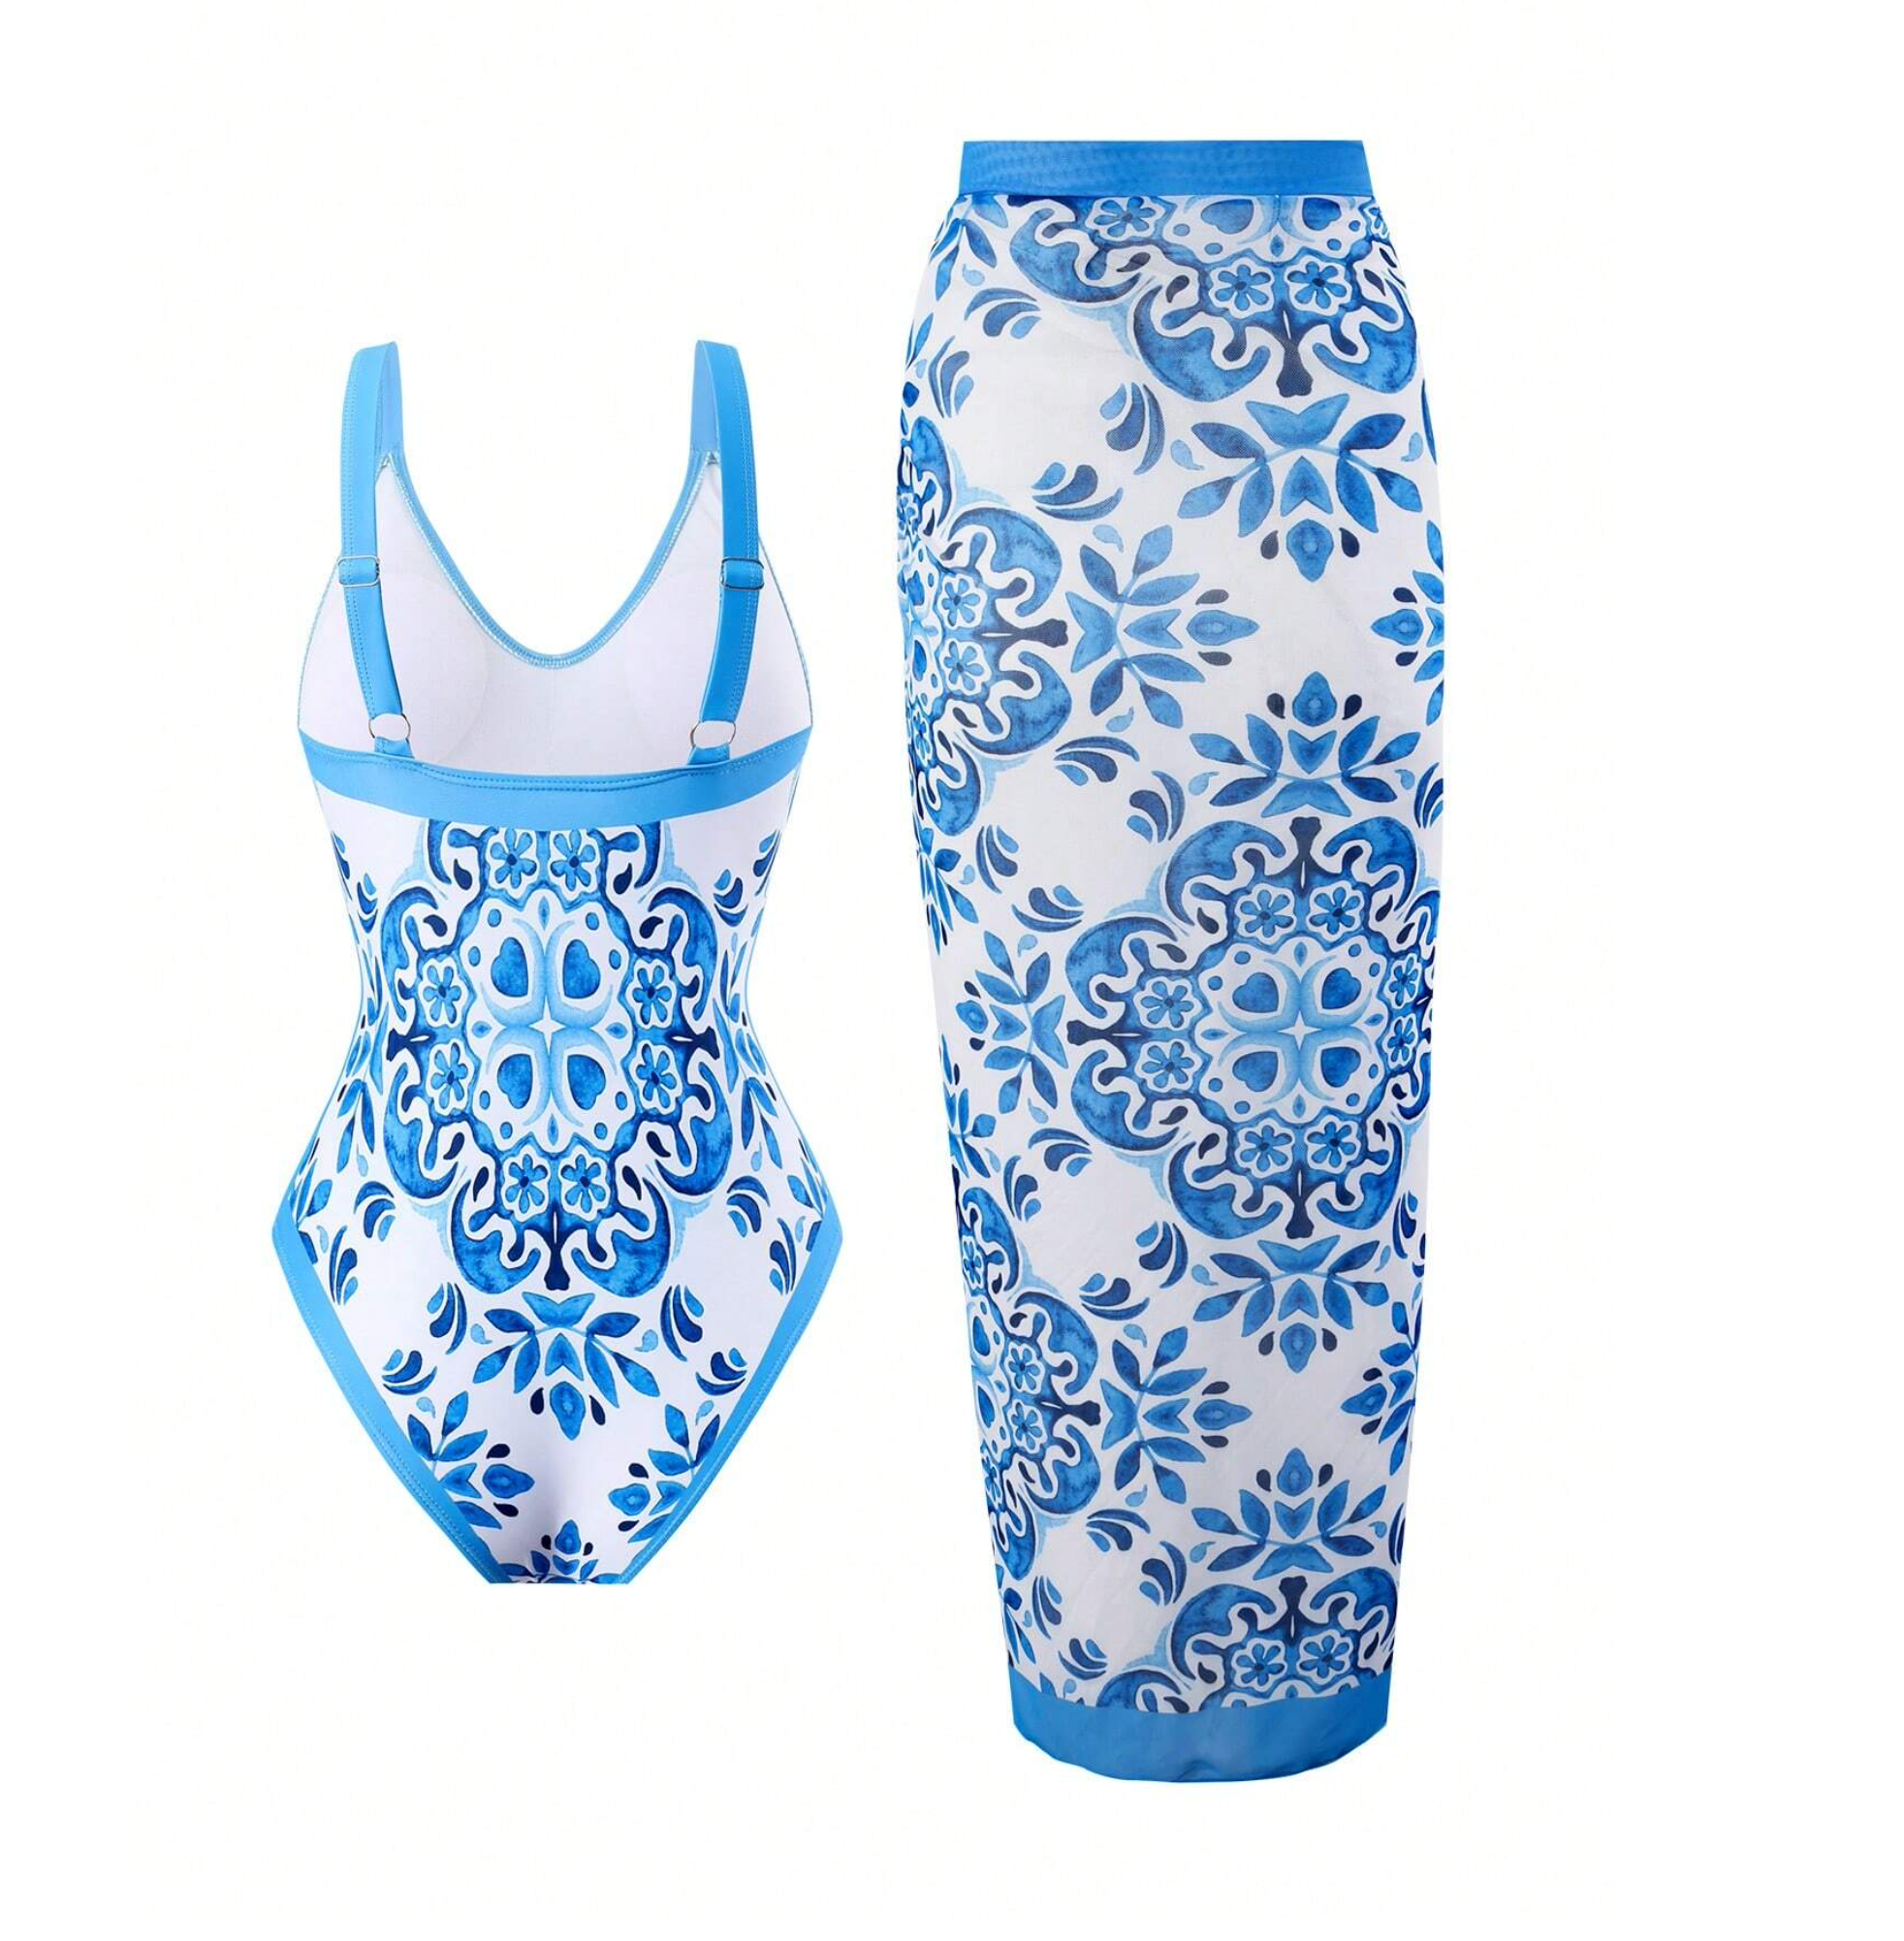 3 Pack Luxe Mosaic Print Onepiece & Sarong